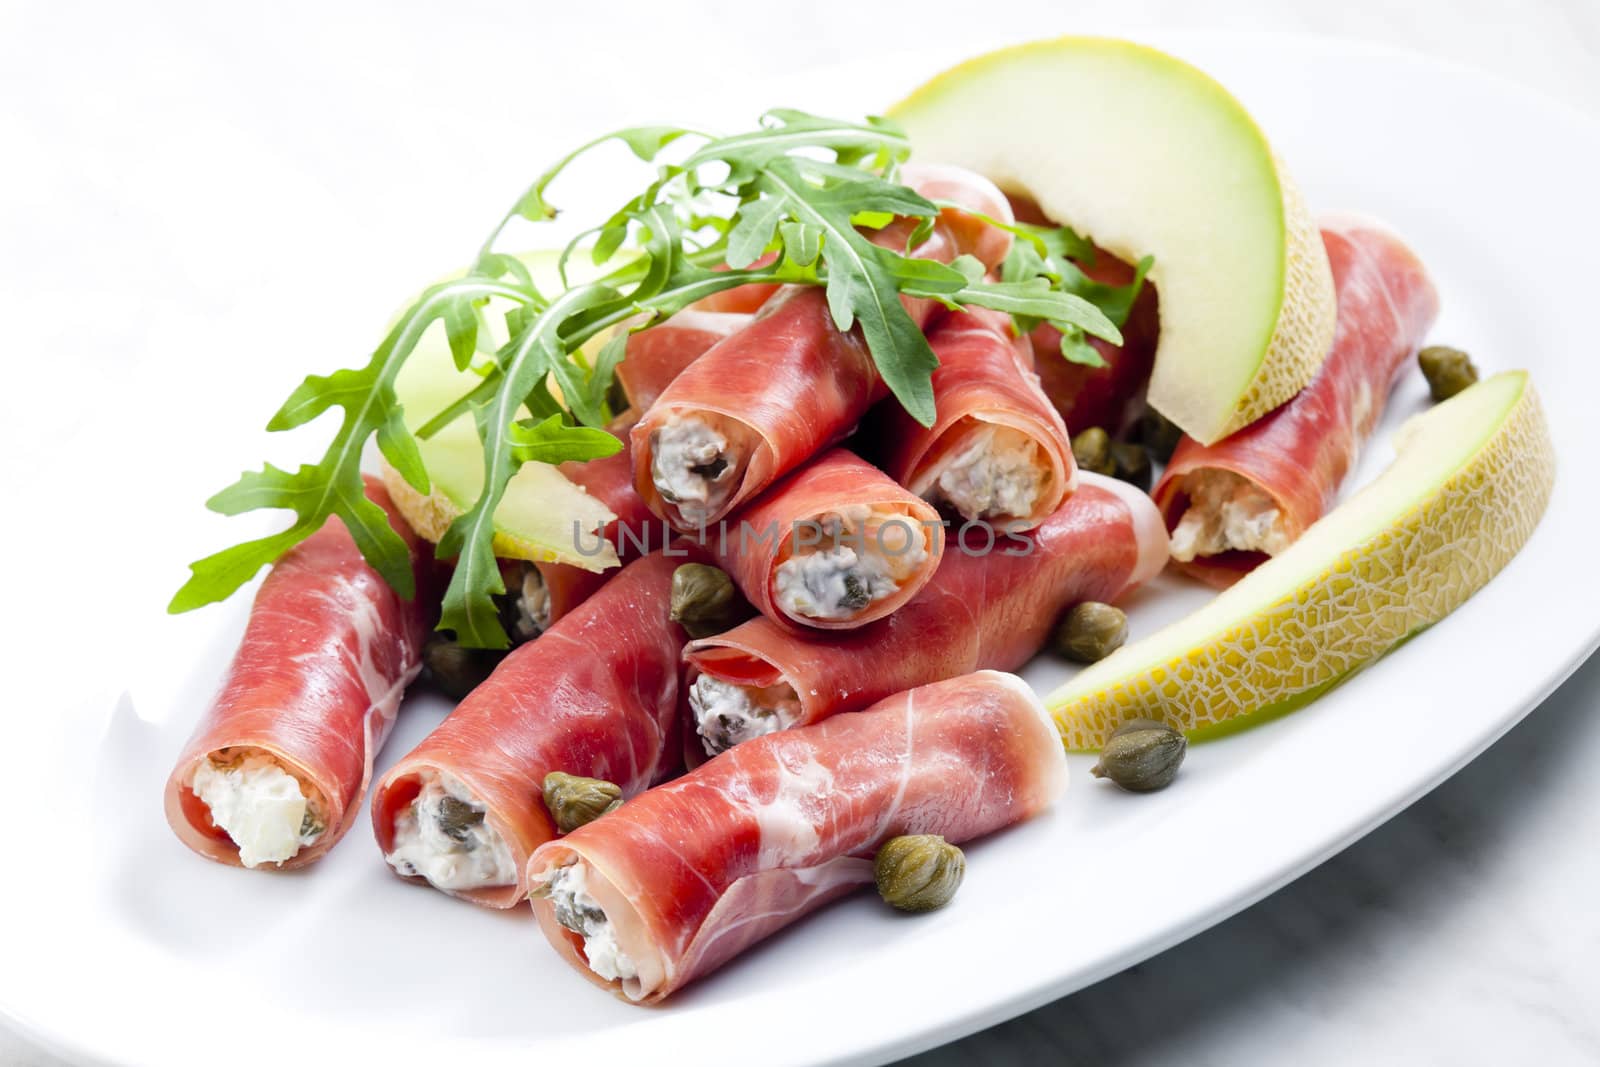 Parma ham rolls filled with cream cheese, Galia melon and capers by phbcz